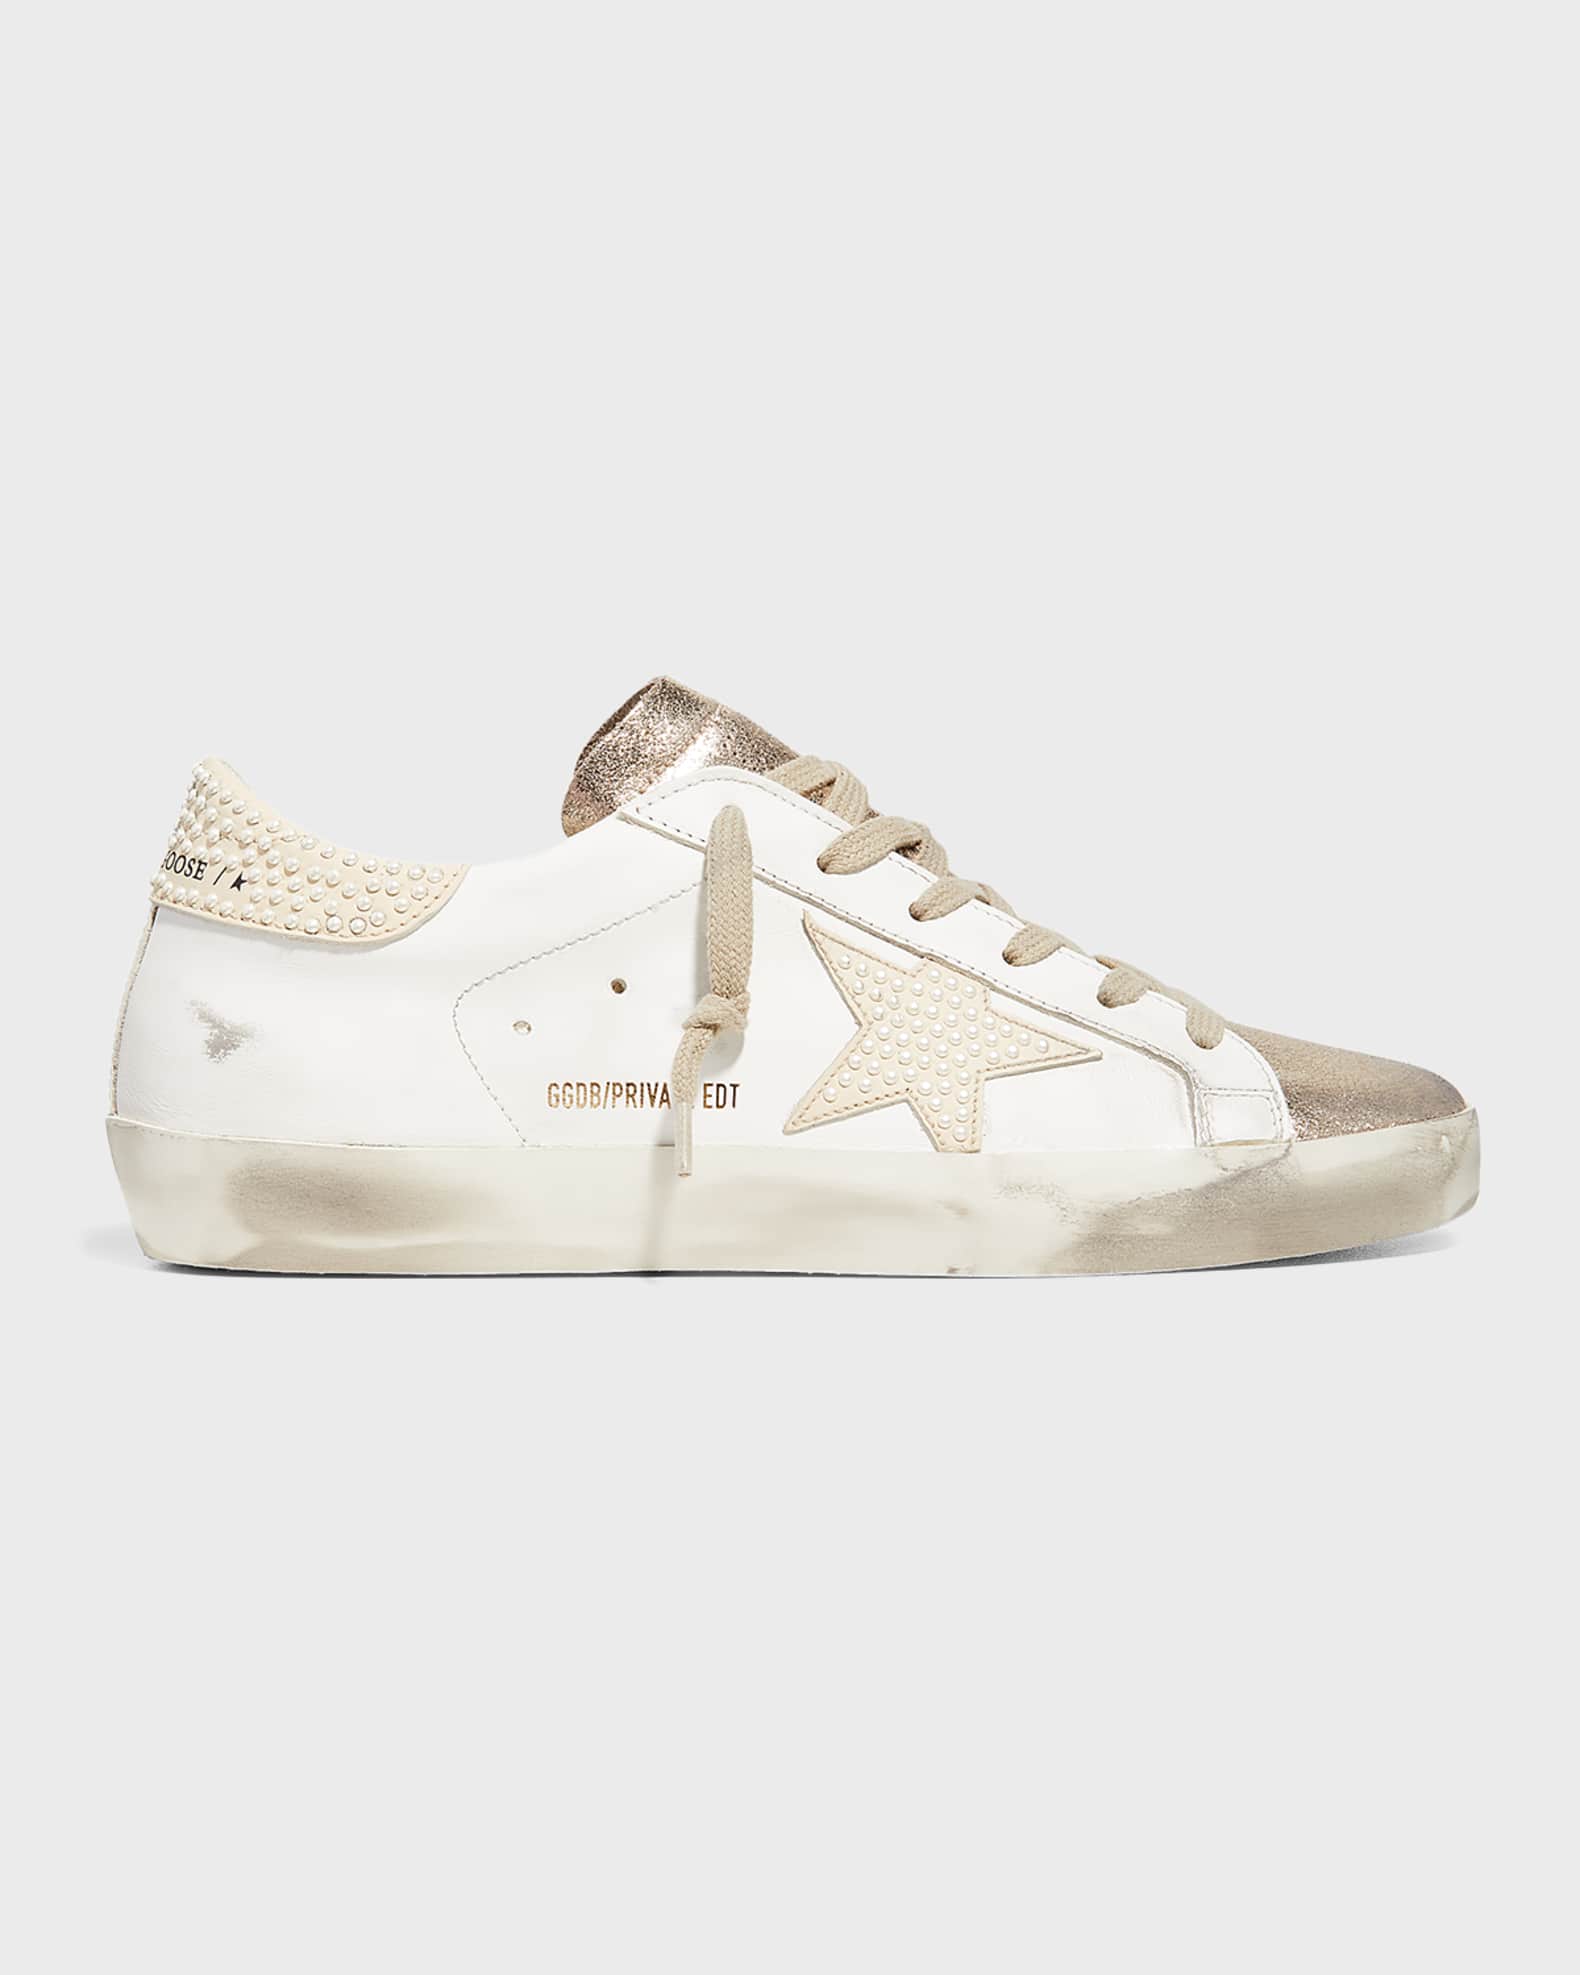 Golden Goose Superstar Pearly Leather Low-Top Sneakers | Neiman Marcus